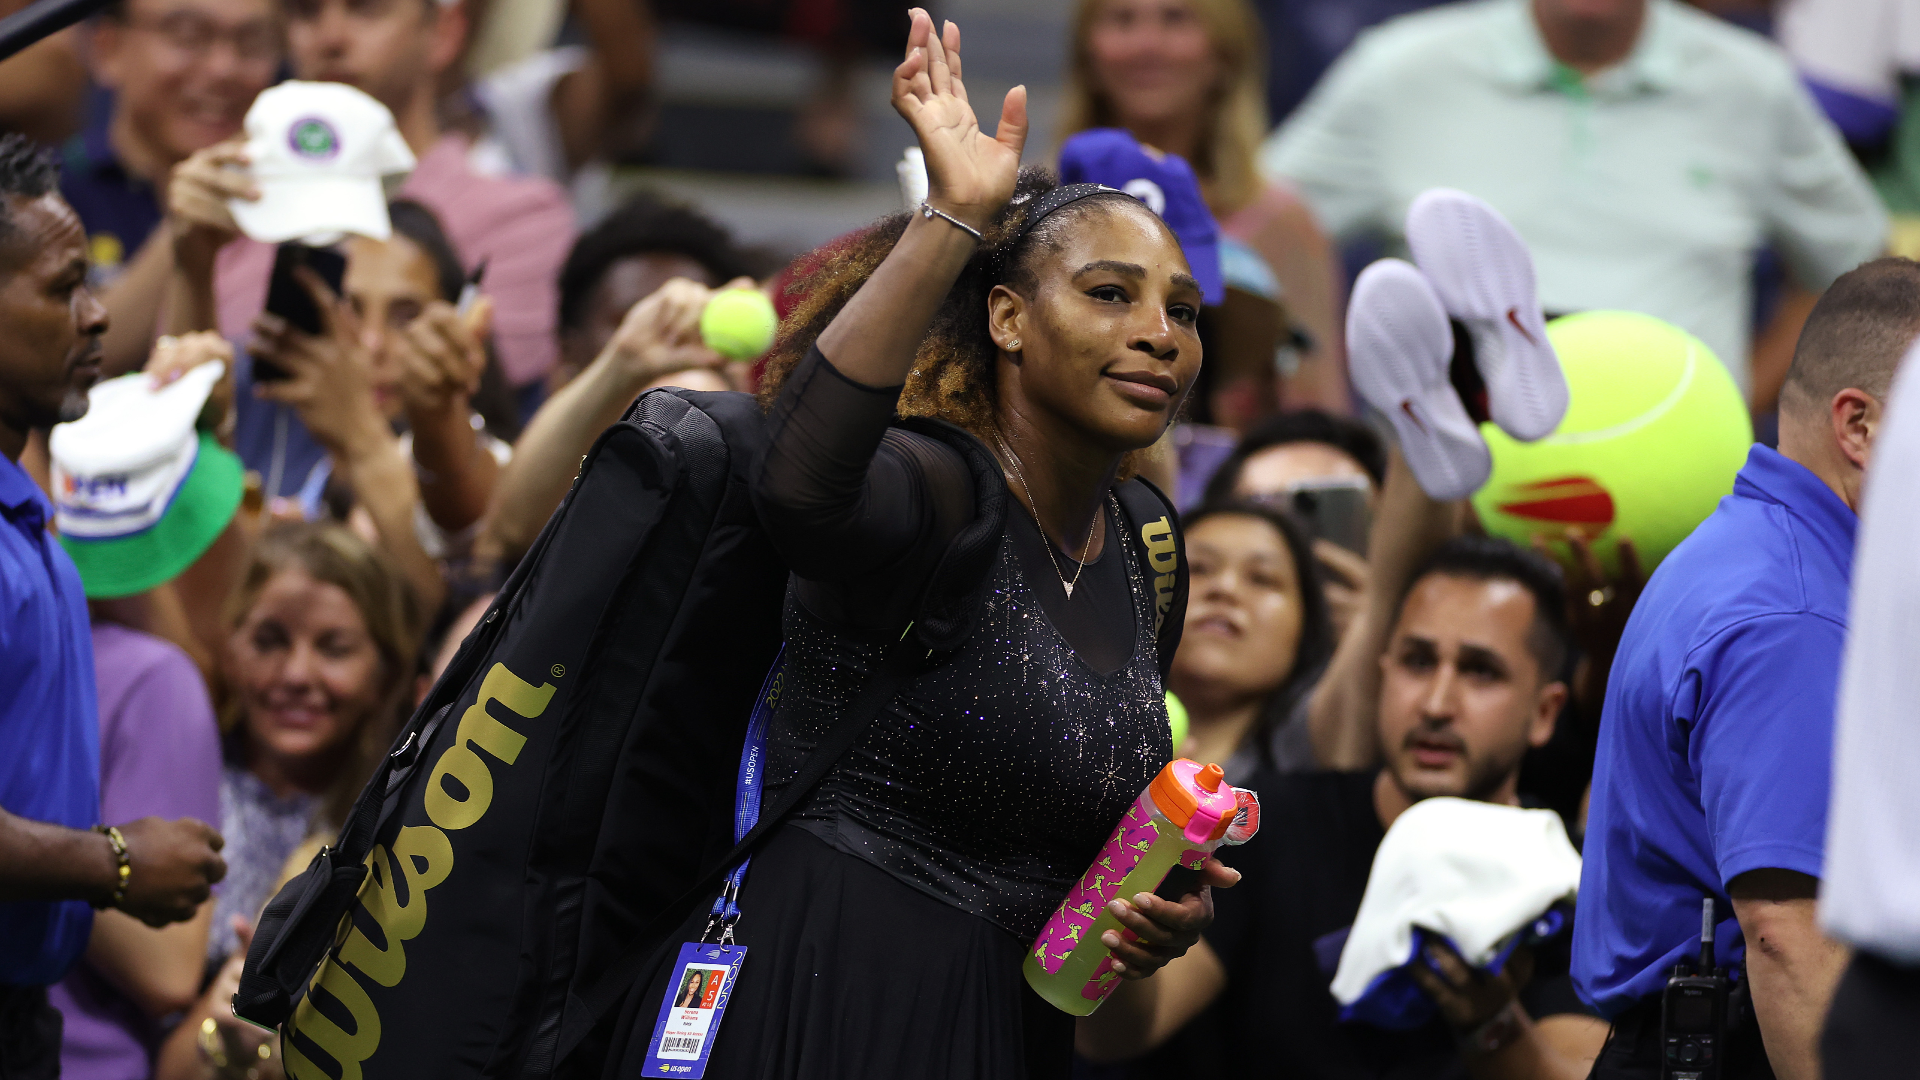 Serena Williams credits the enthusiastic crowd at Arthur Ashe Stadium for fueling her farewell campaign at the US Open